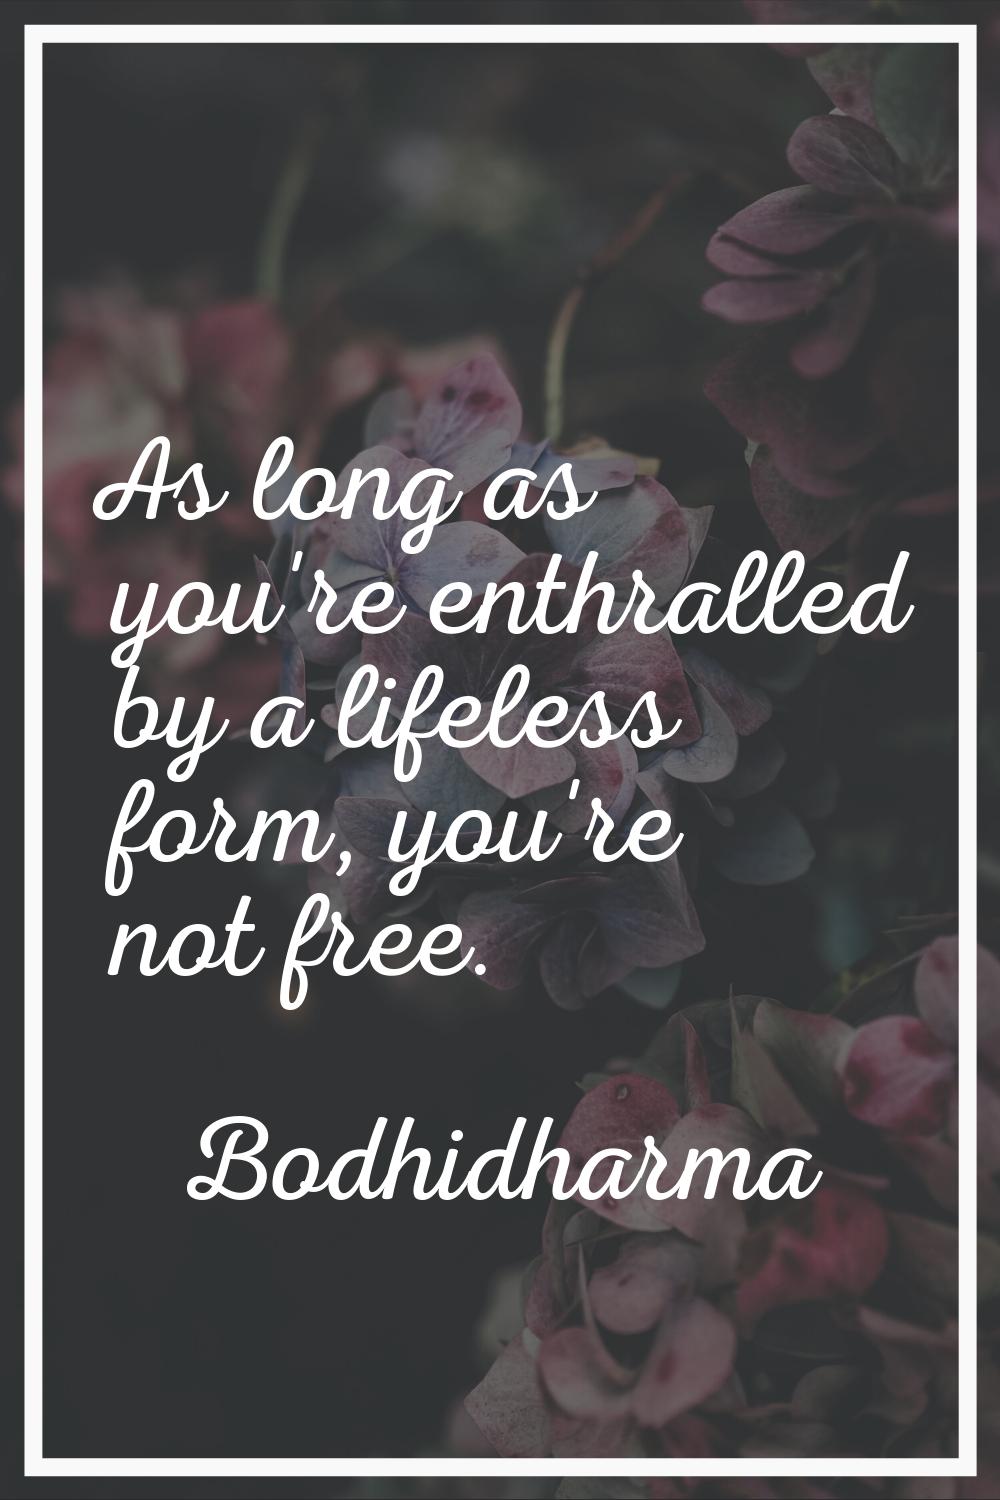 As long as you're enthralled by a lifeless form, you're not free.